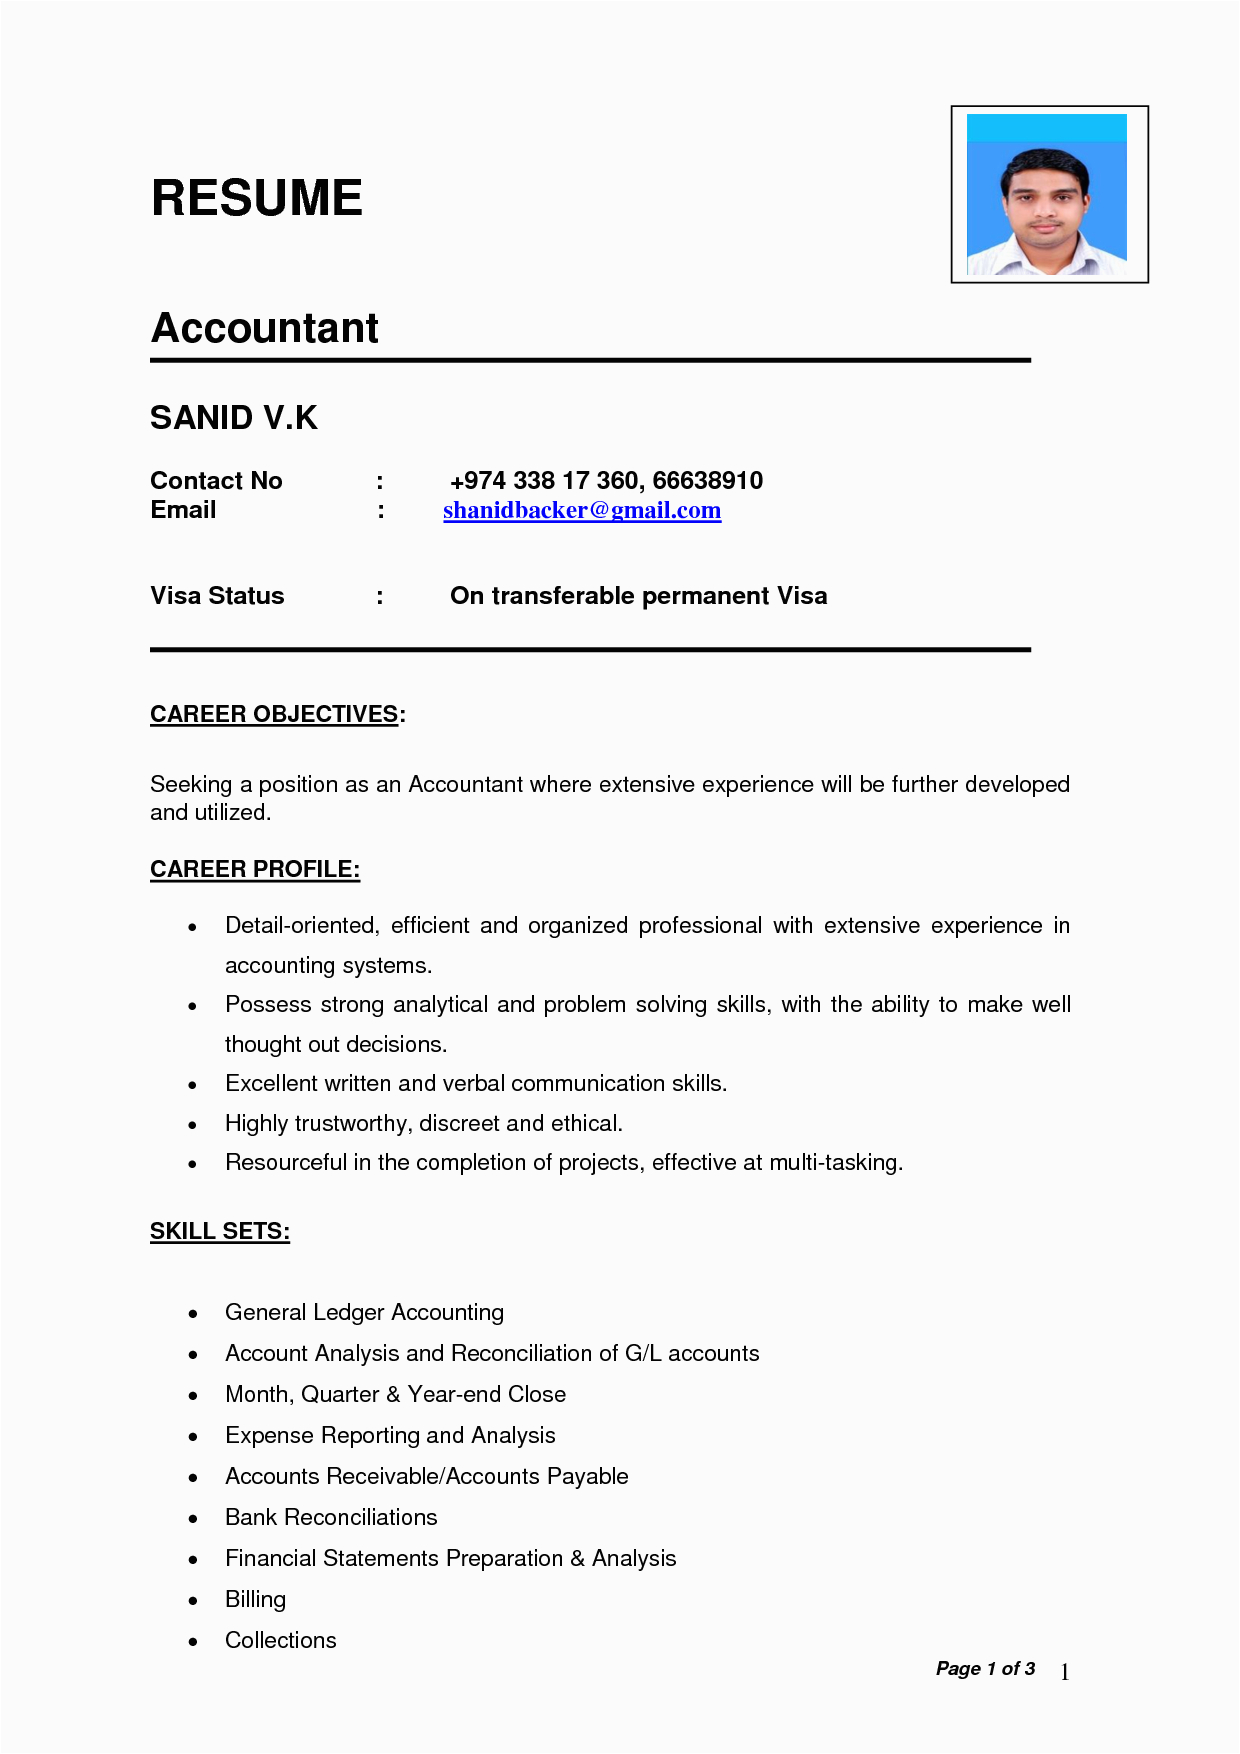 Accounting Resume Samples 2018 In India Resume format India format India Resume Resumeformat